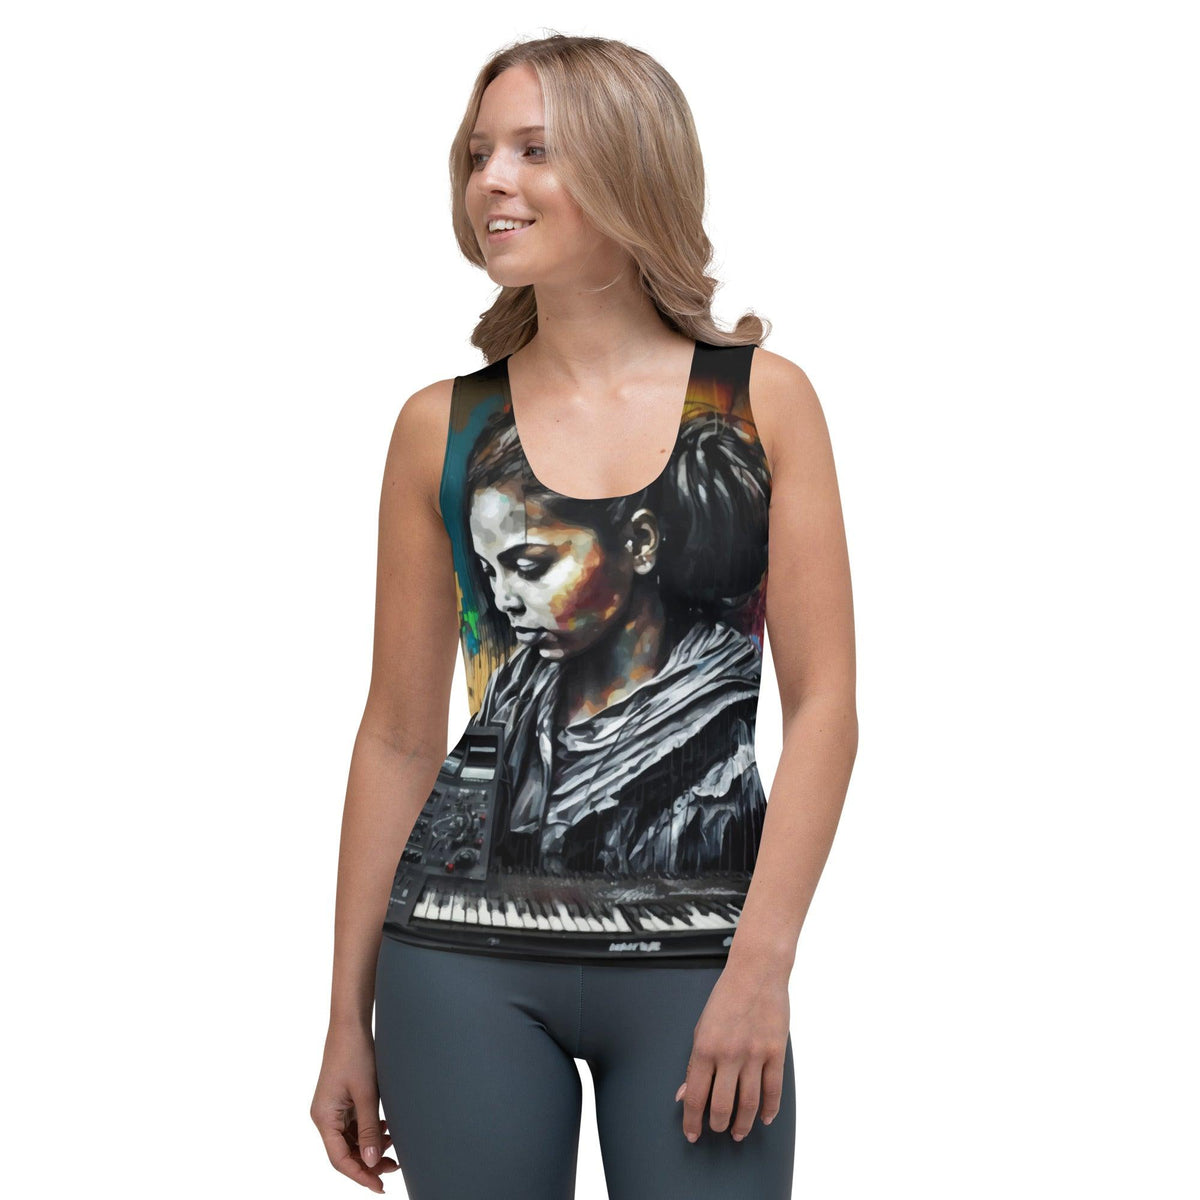 Piano And Guitar Brilliance Sublimation Cut & Sew Tank Top - Beyond T-shirts